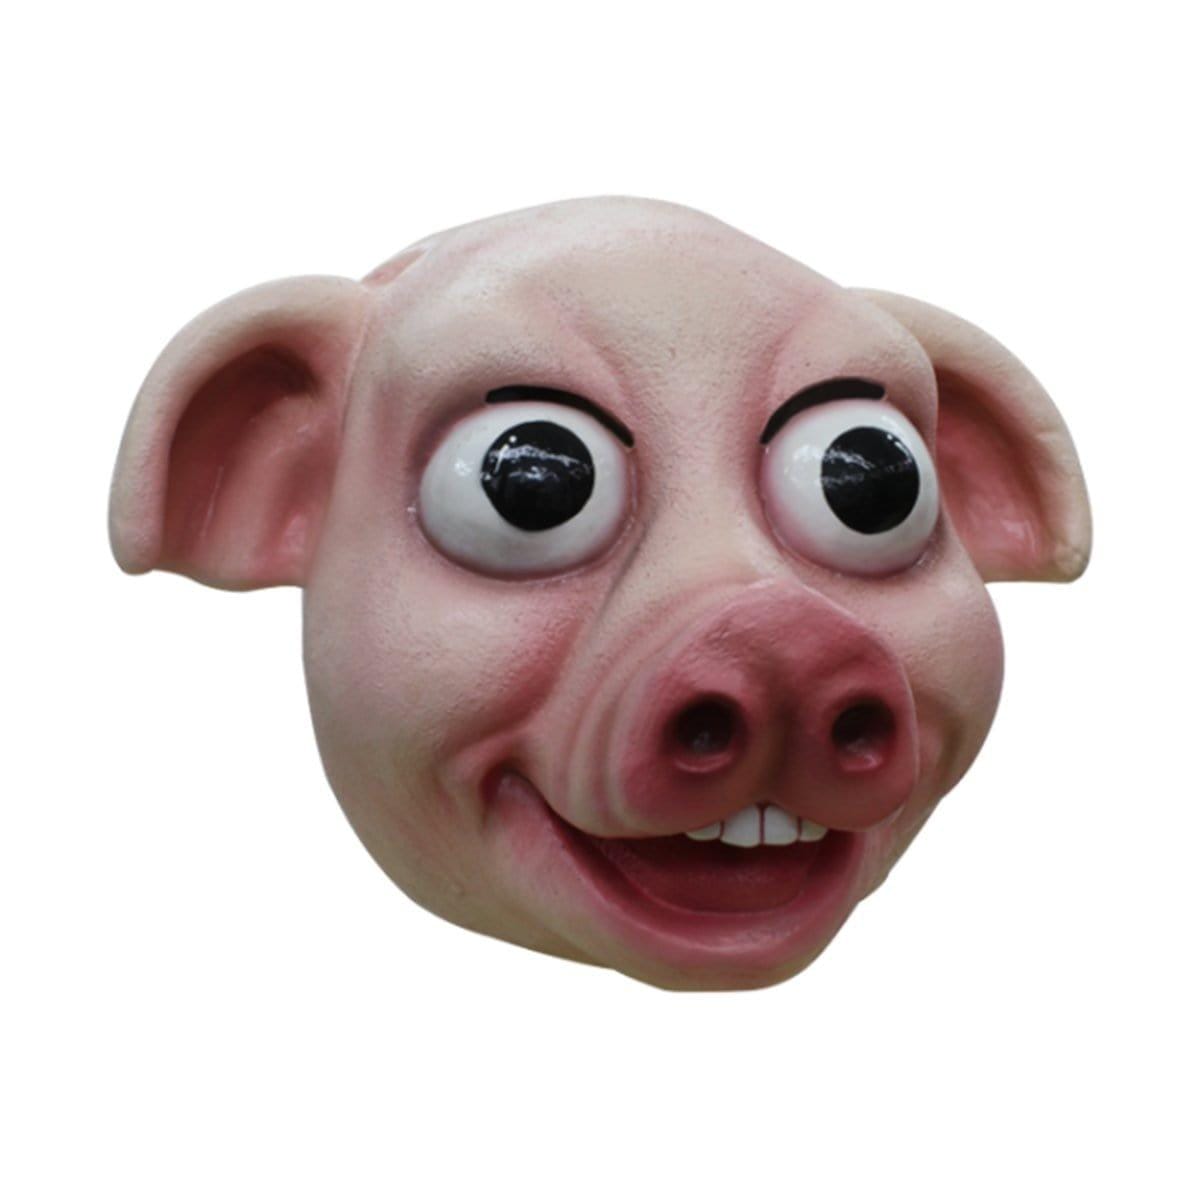 Buy Costume Accessories Pig Mask sold at Party Expert